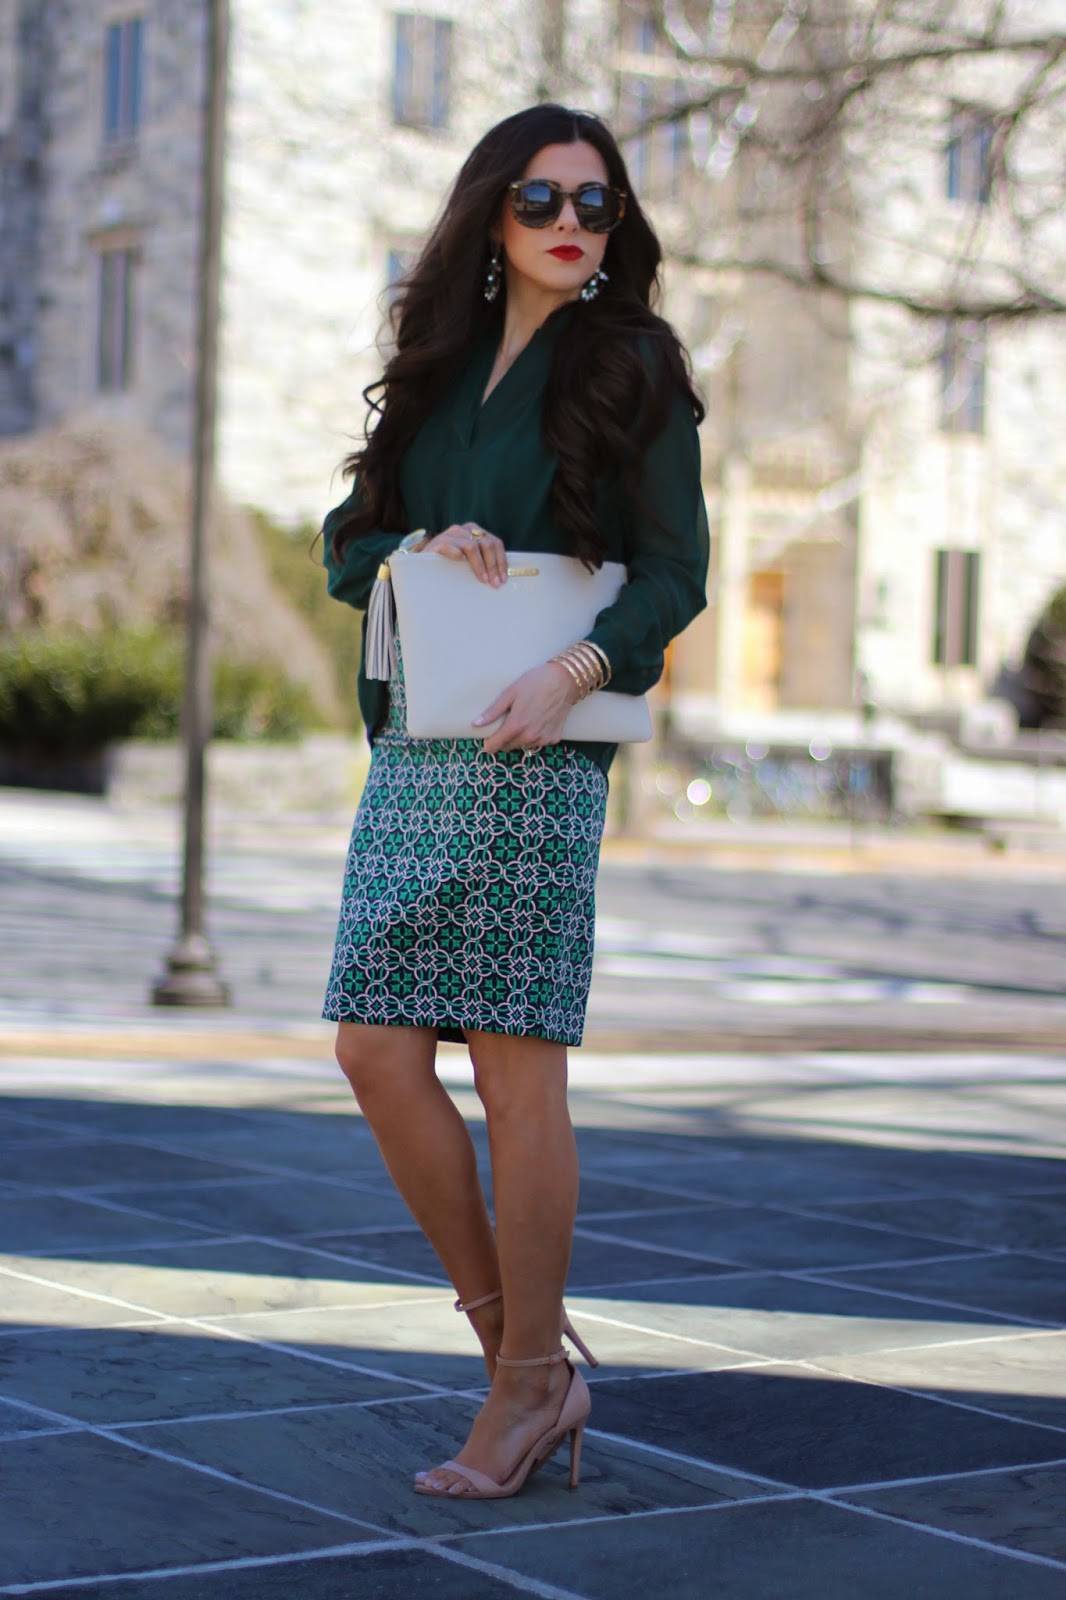 20 Amazing Outfit Ideas for The Following Season